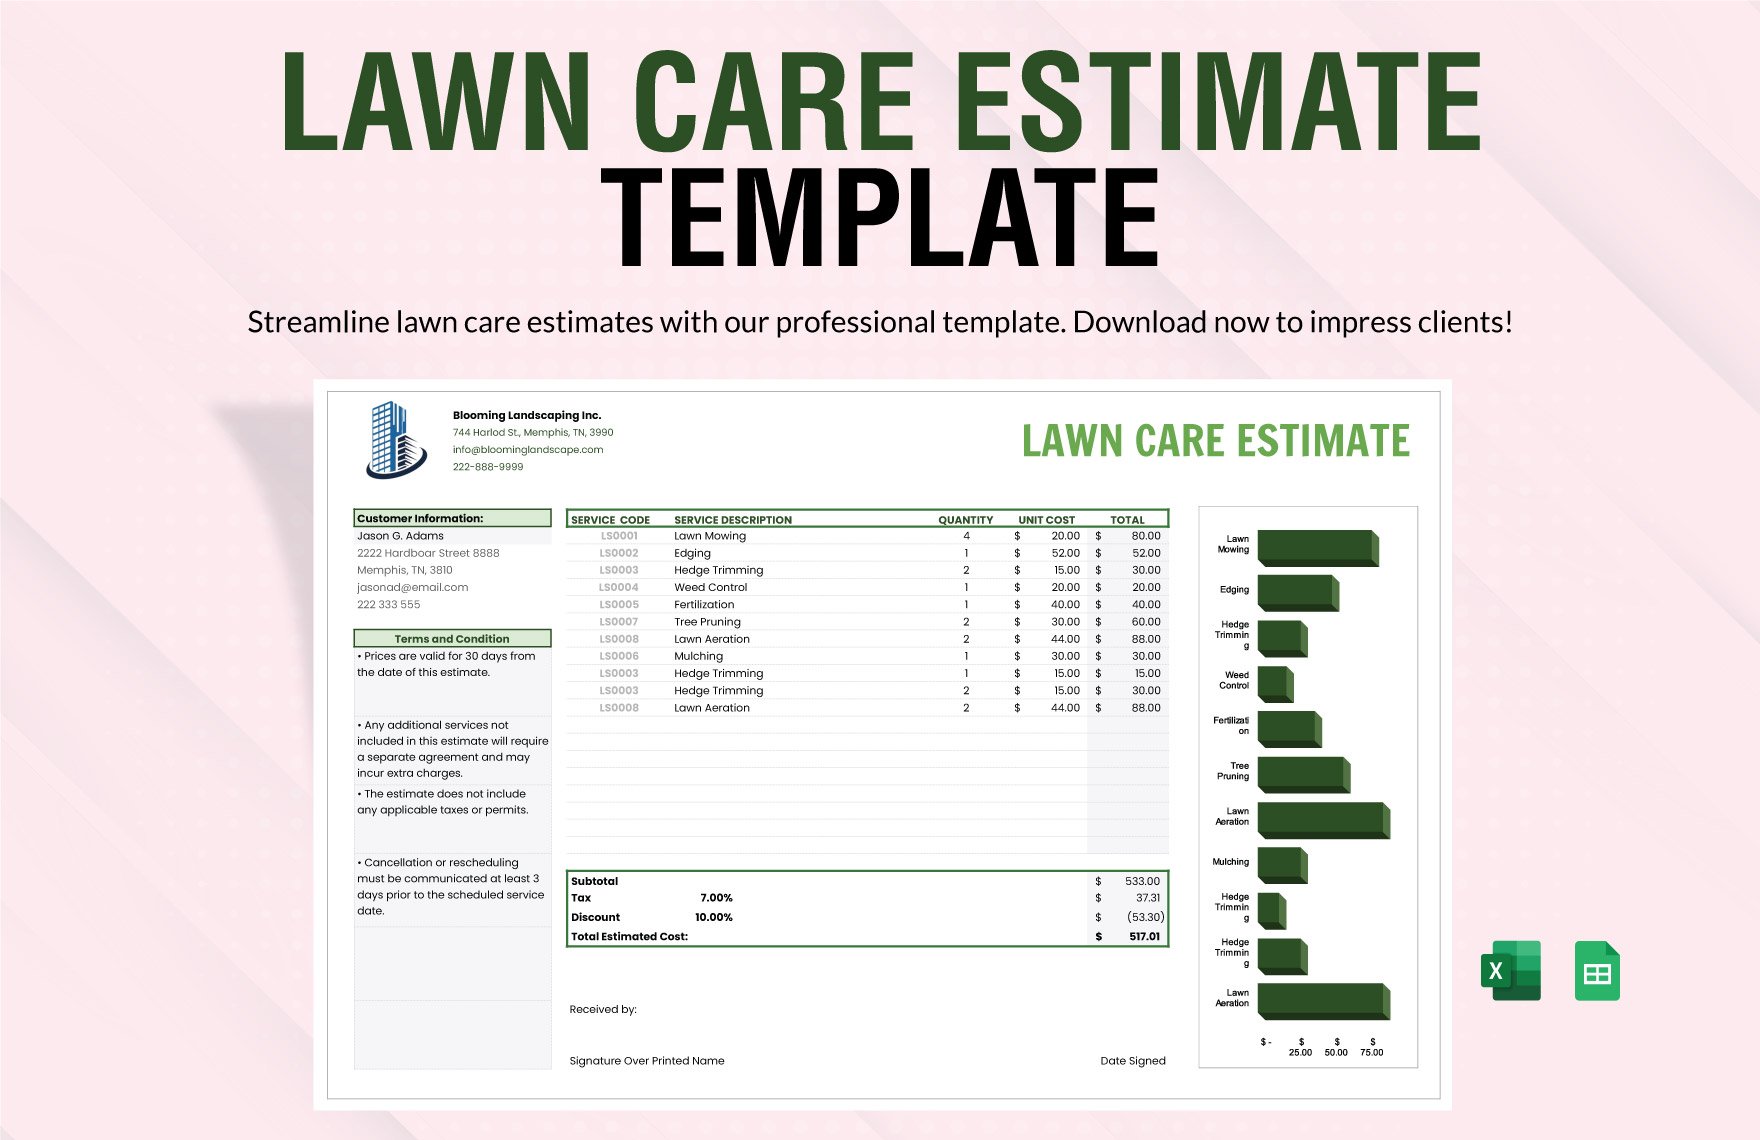 Lawn Care Estimate Template in Excel, Google Sheets